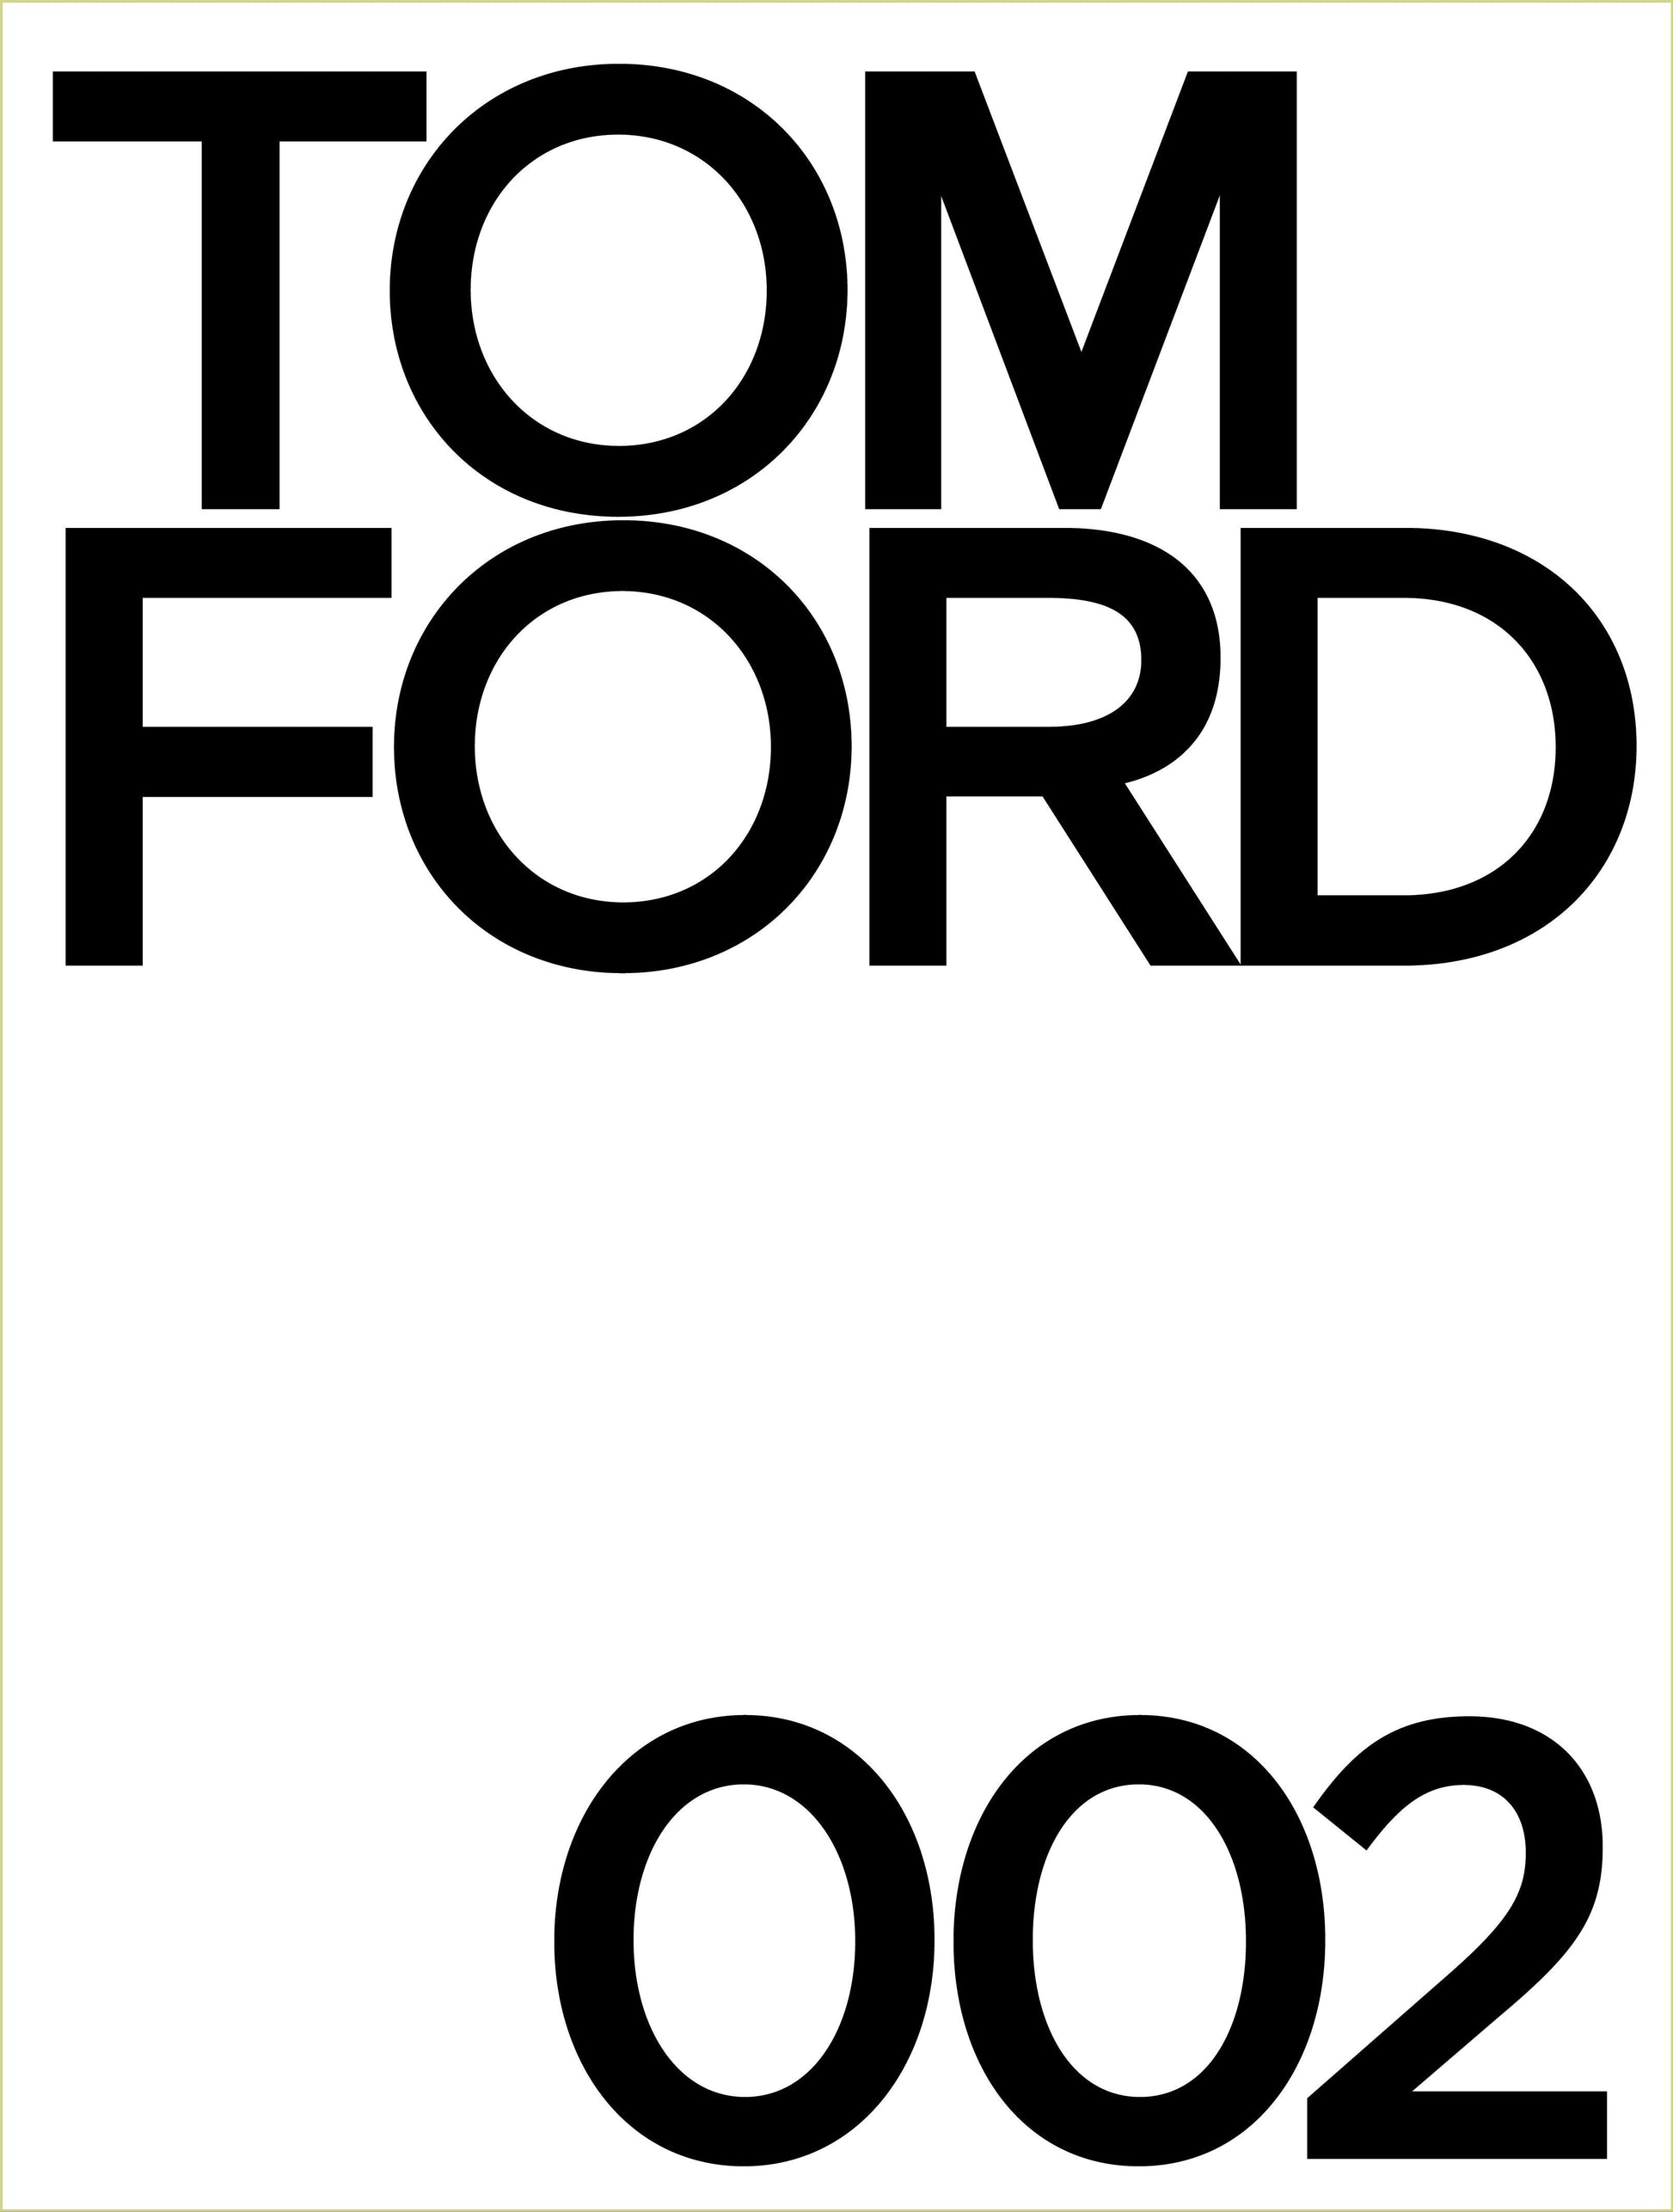 Tom Ford 002 - Handworks Nouveau Paperie